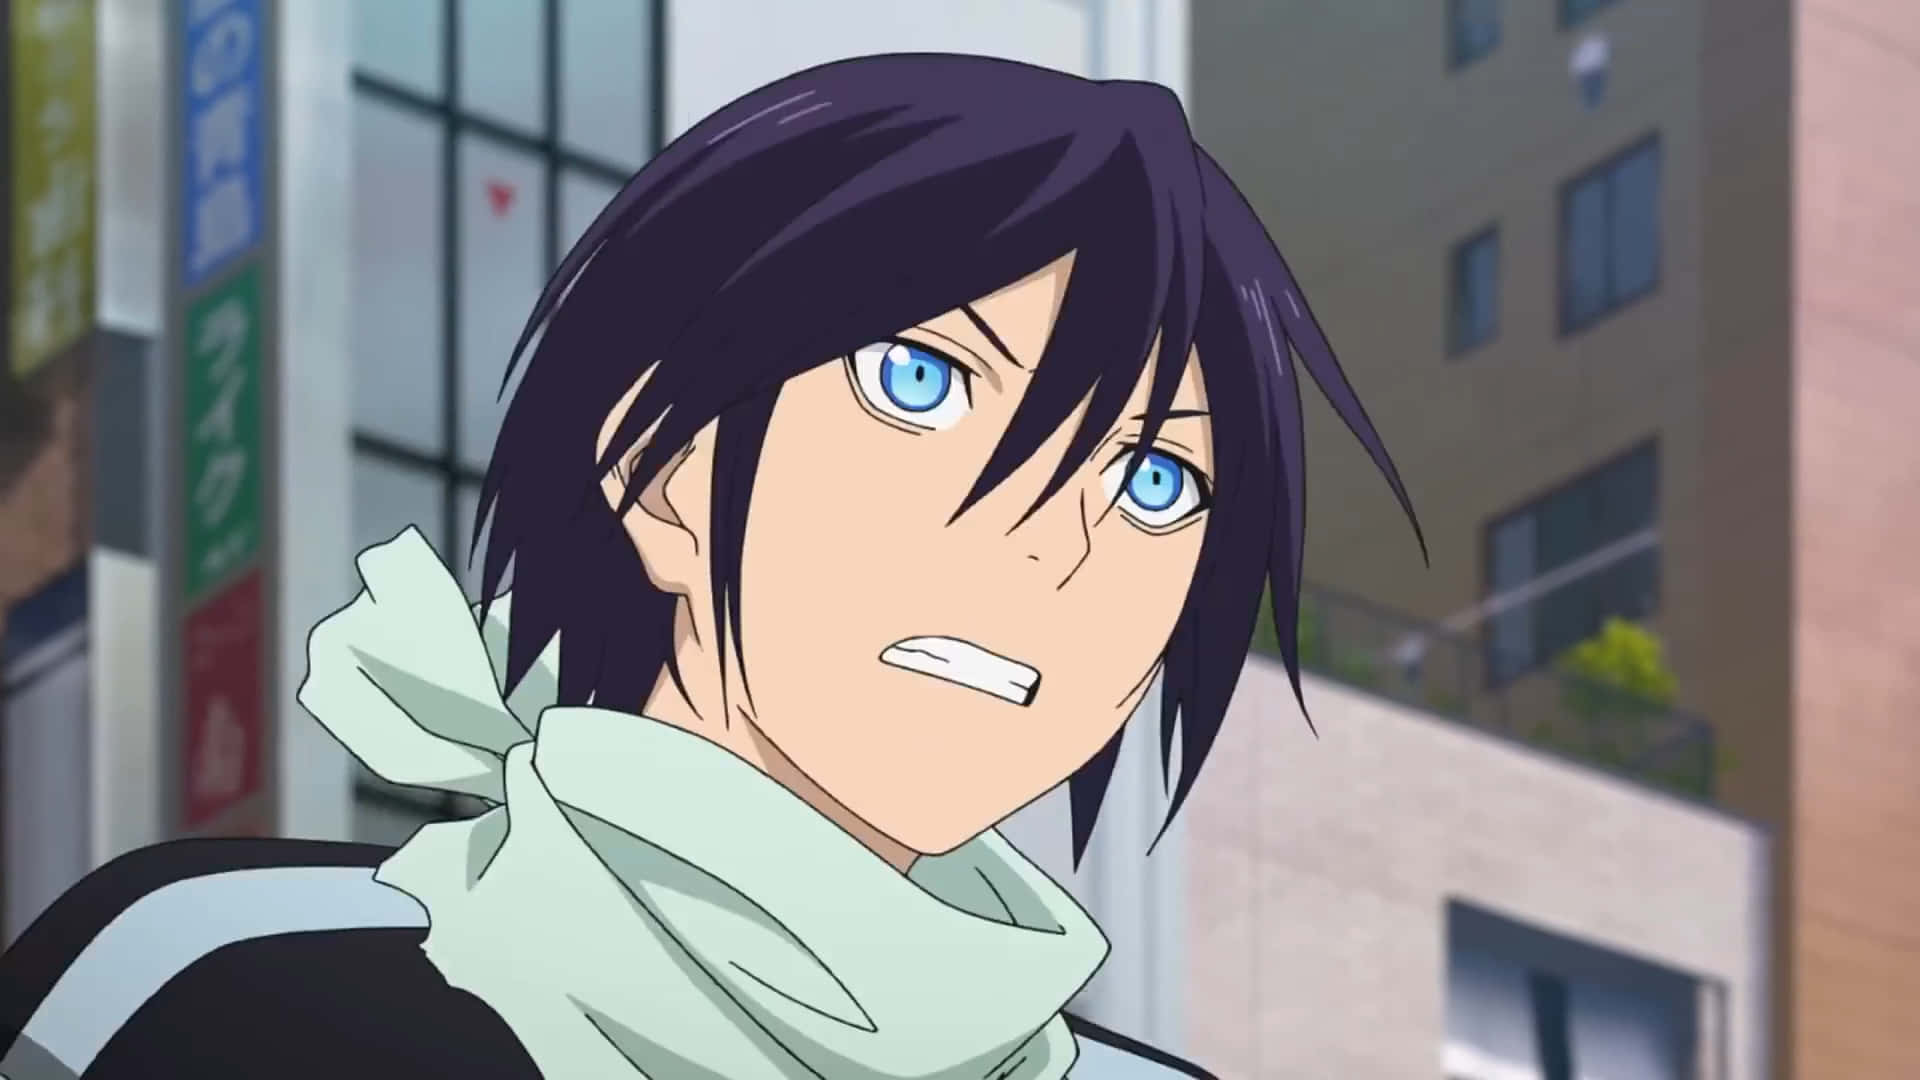 Yato - the God of Fortune in Noragami